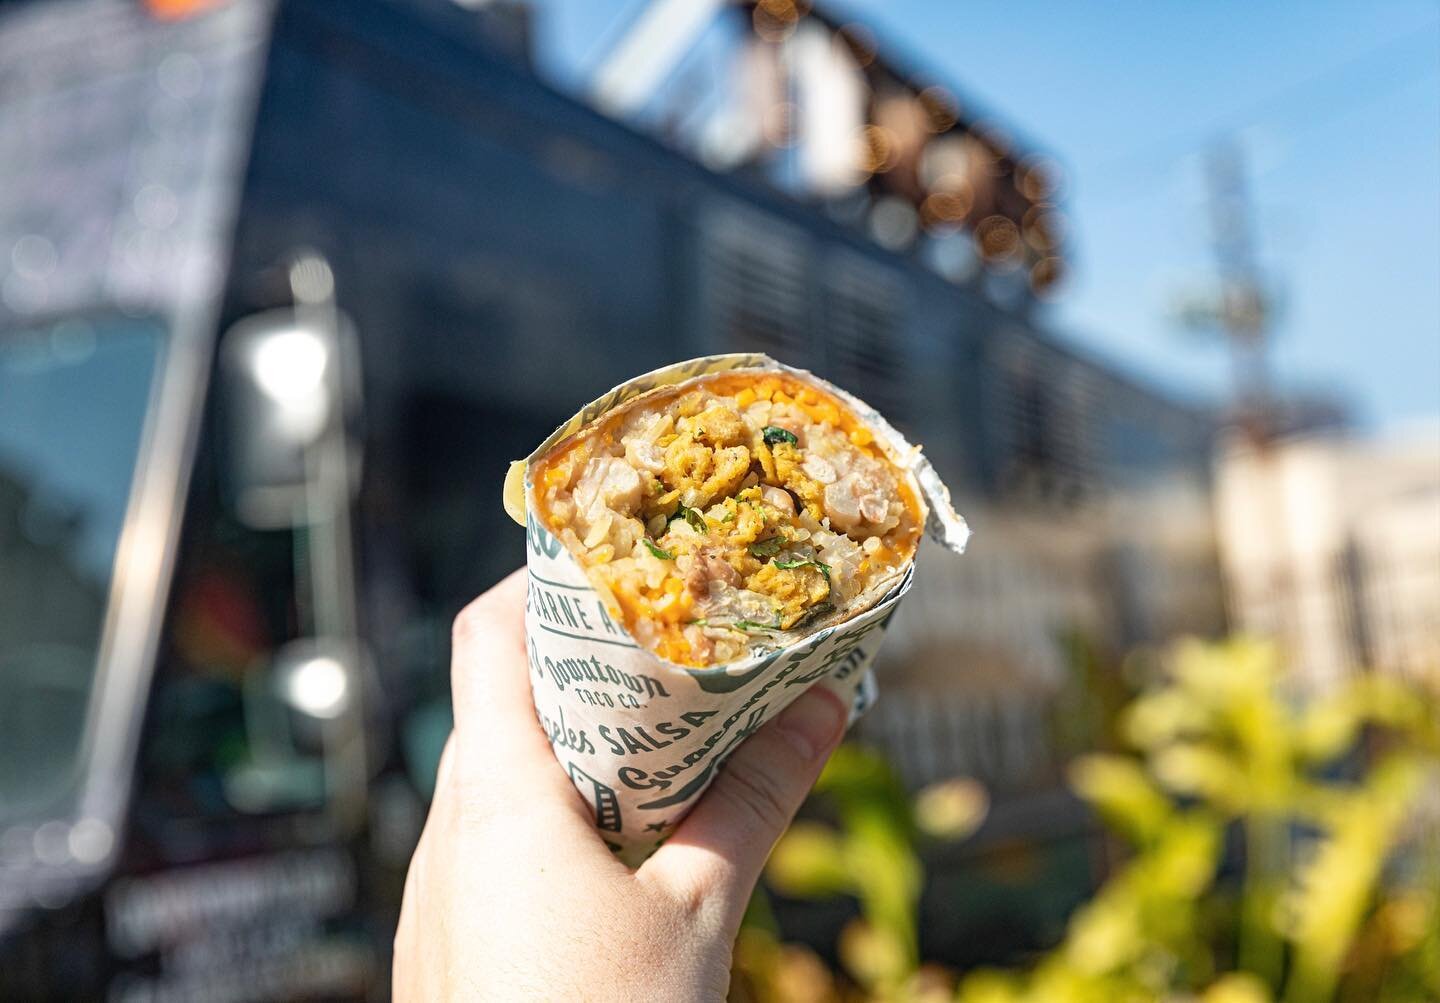 BURRITO cravings. 🌯🤤 We make every meal with fresh authentic ingredients and hand-pressed tortillas! Find us every Thursday - Sunday in DTLA. 🏙 Order online or to-go &bull; Visit downtowntaco.com. #downtowntacoco #yum #eeeeeats